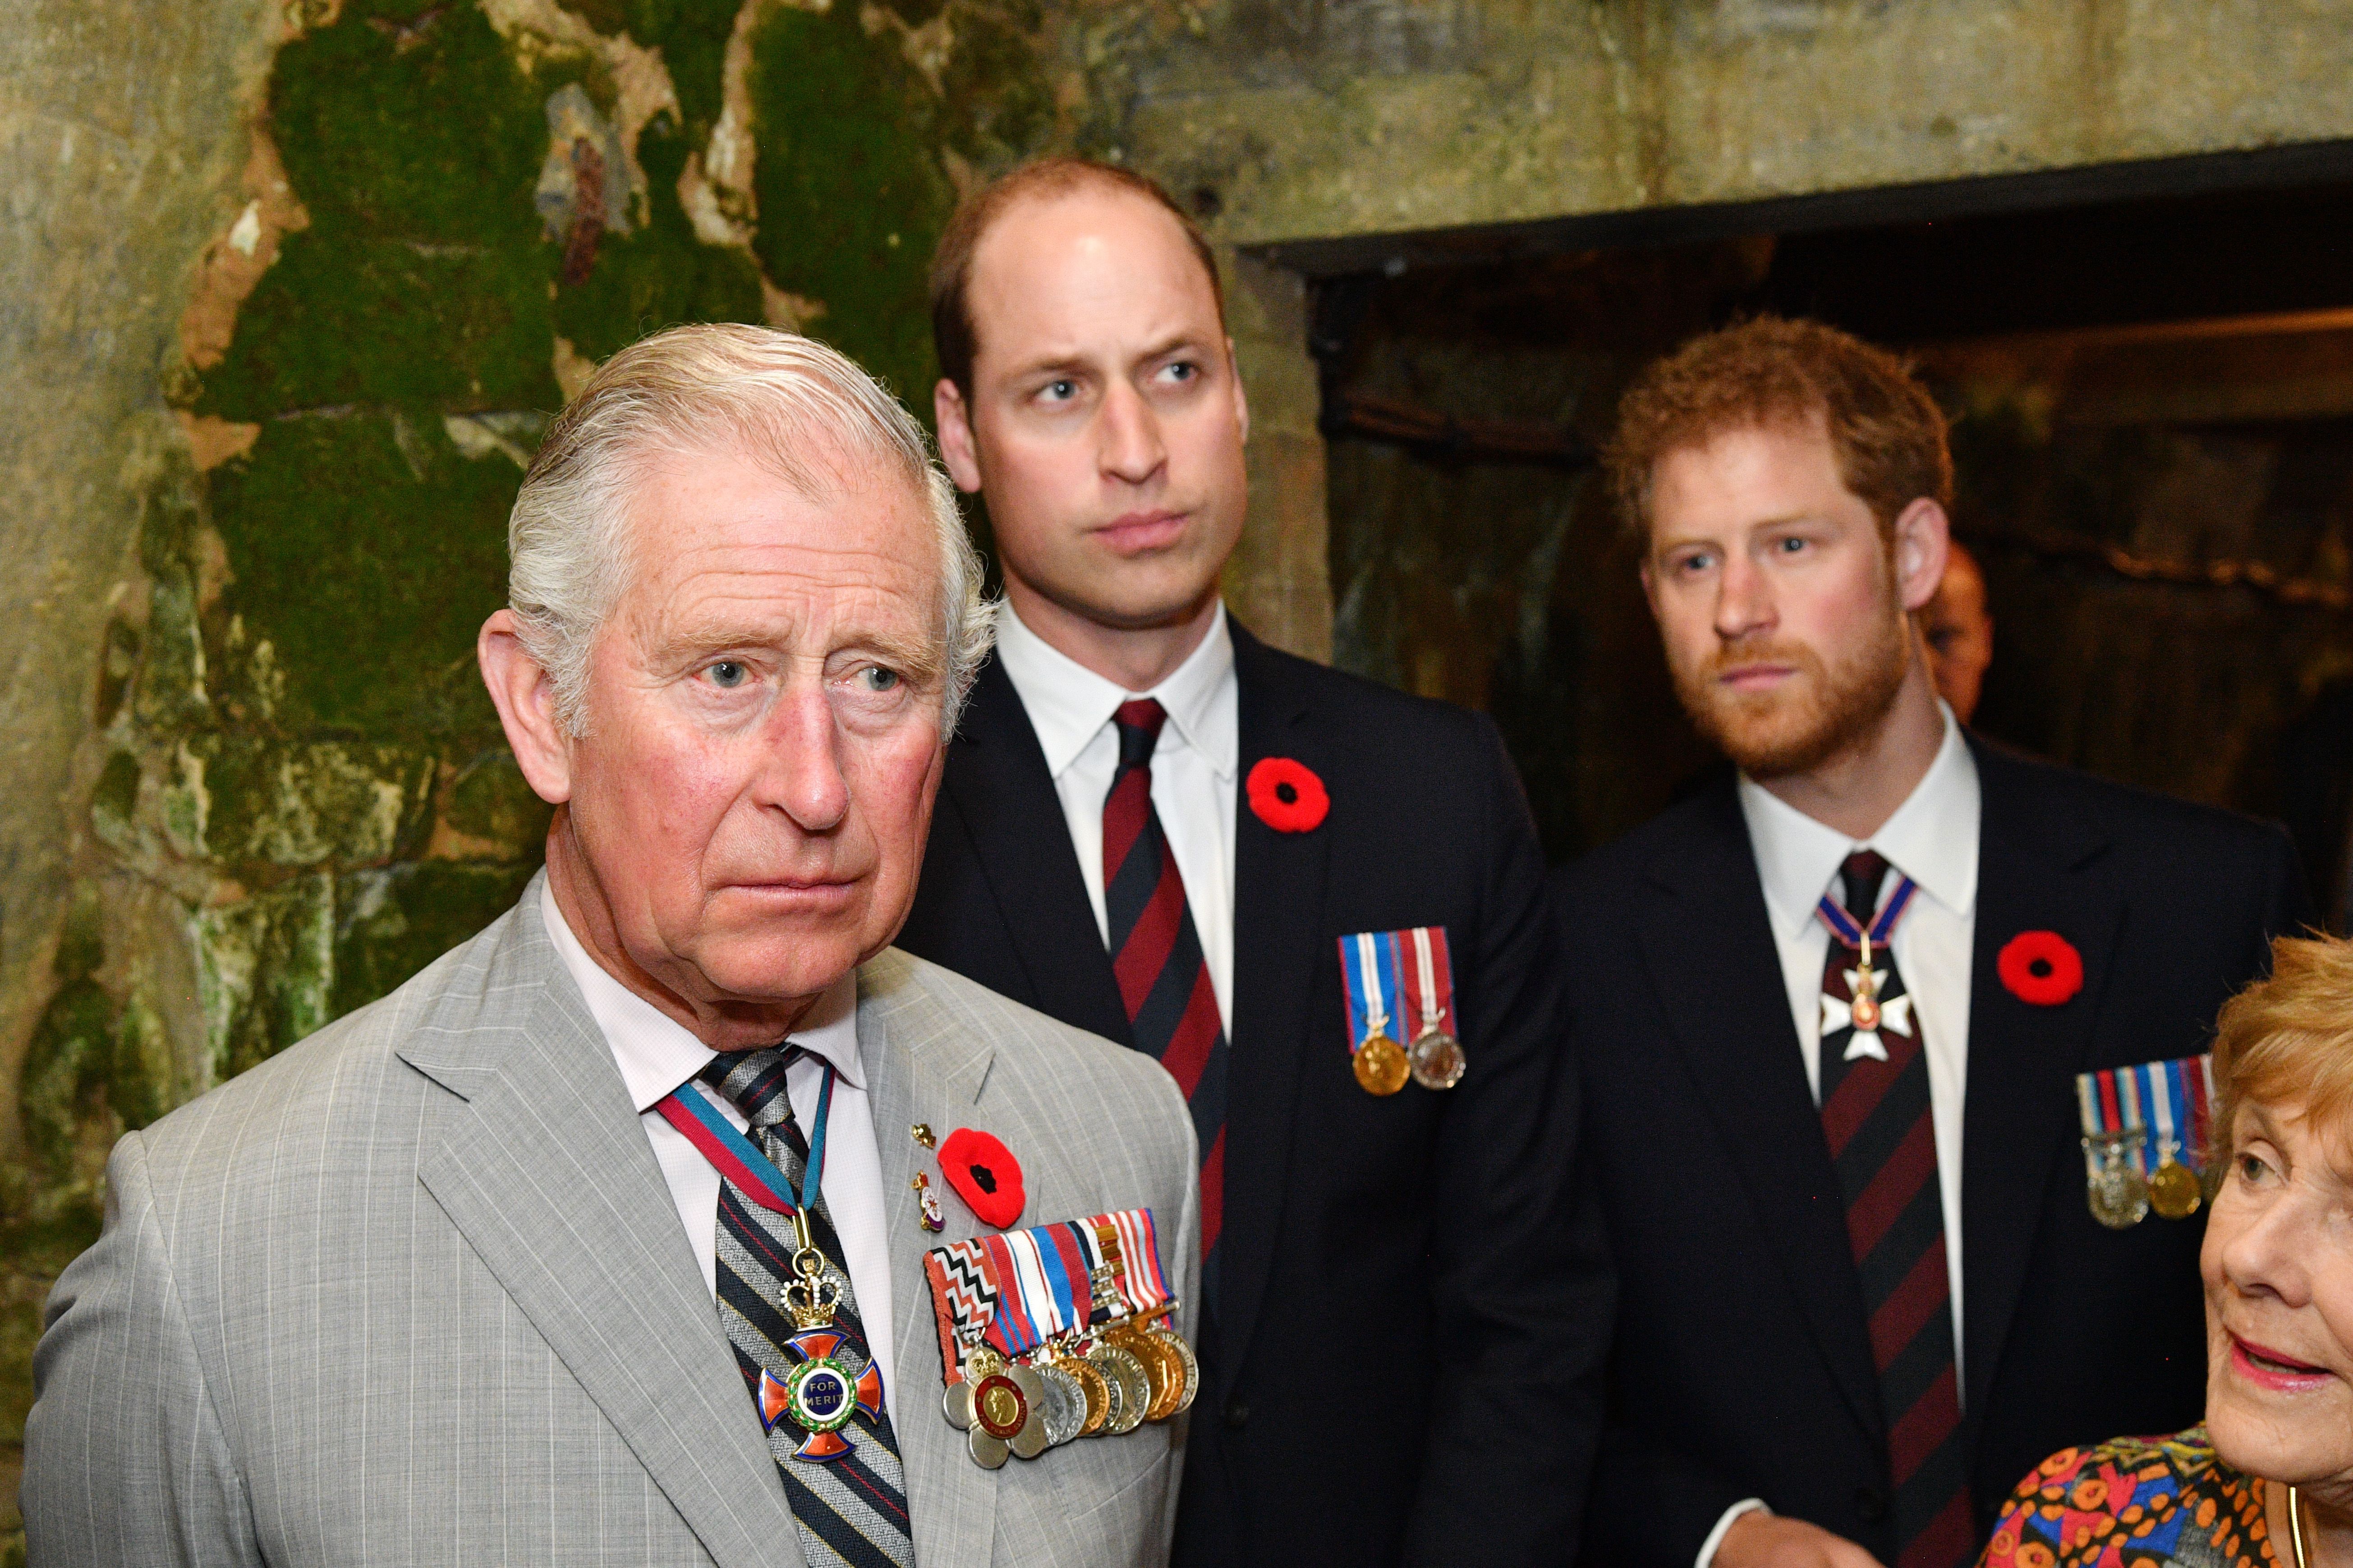 Prince Charles, Prince William, and Prince Harry at Vimy Memorial Park during the commemorations for the centenary of the Battle of Vimy Ridge on April 9, 2017, in Vimy, France. | Source: Getty Images